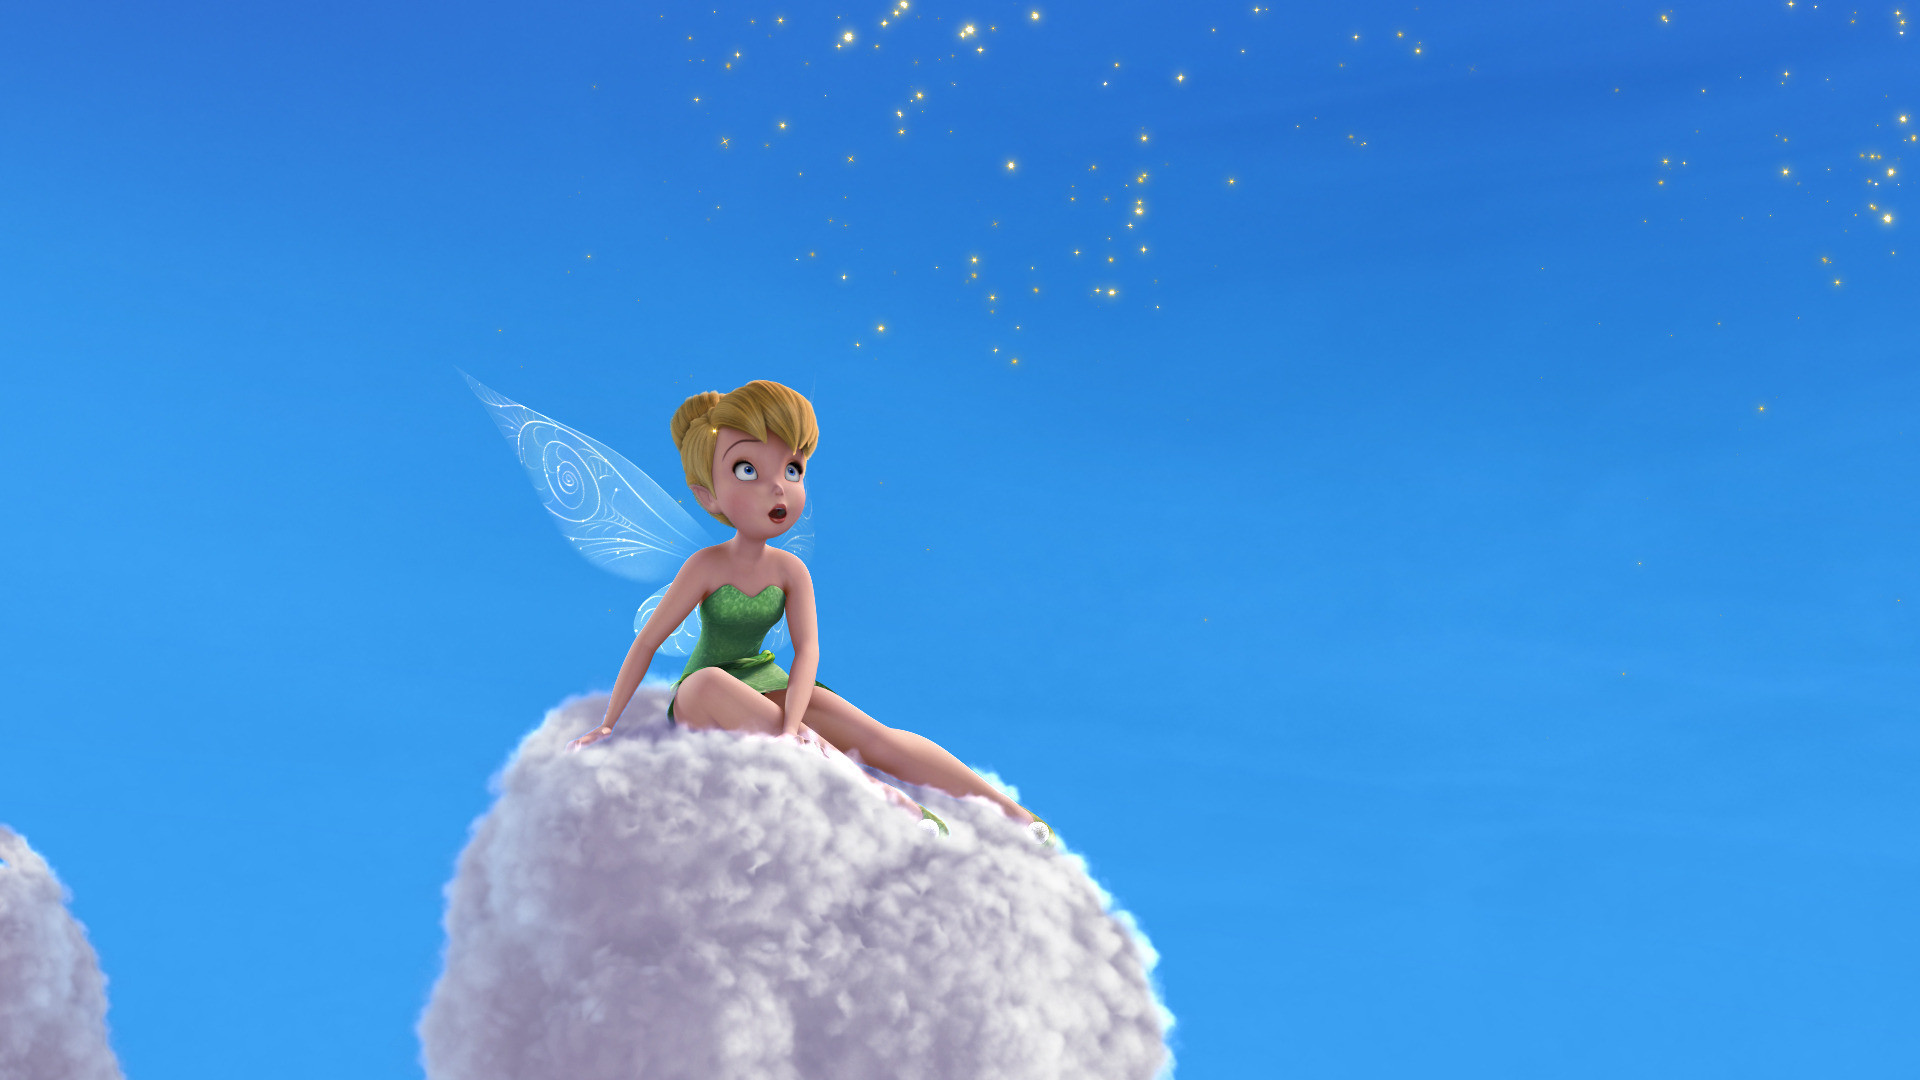 High Resolution Awesome Tinkerbell Background Wallpaper Full Size